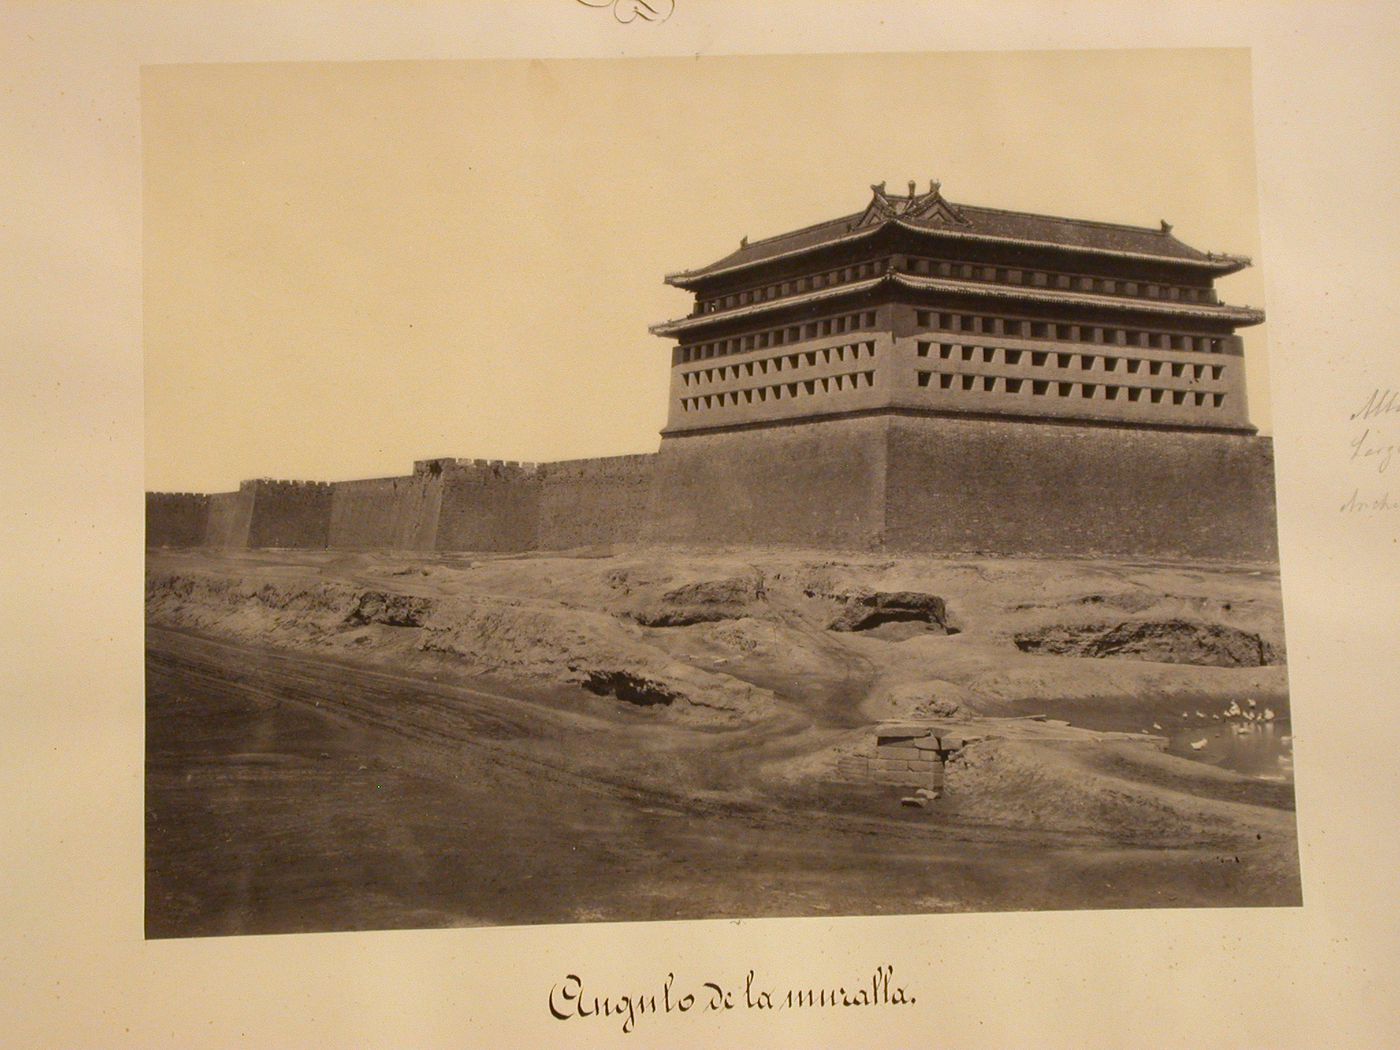 View of a corner tower and defensive wall of Peking (now Beijing), China